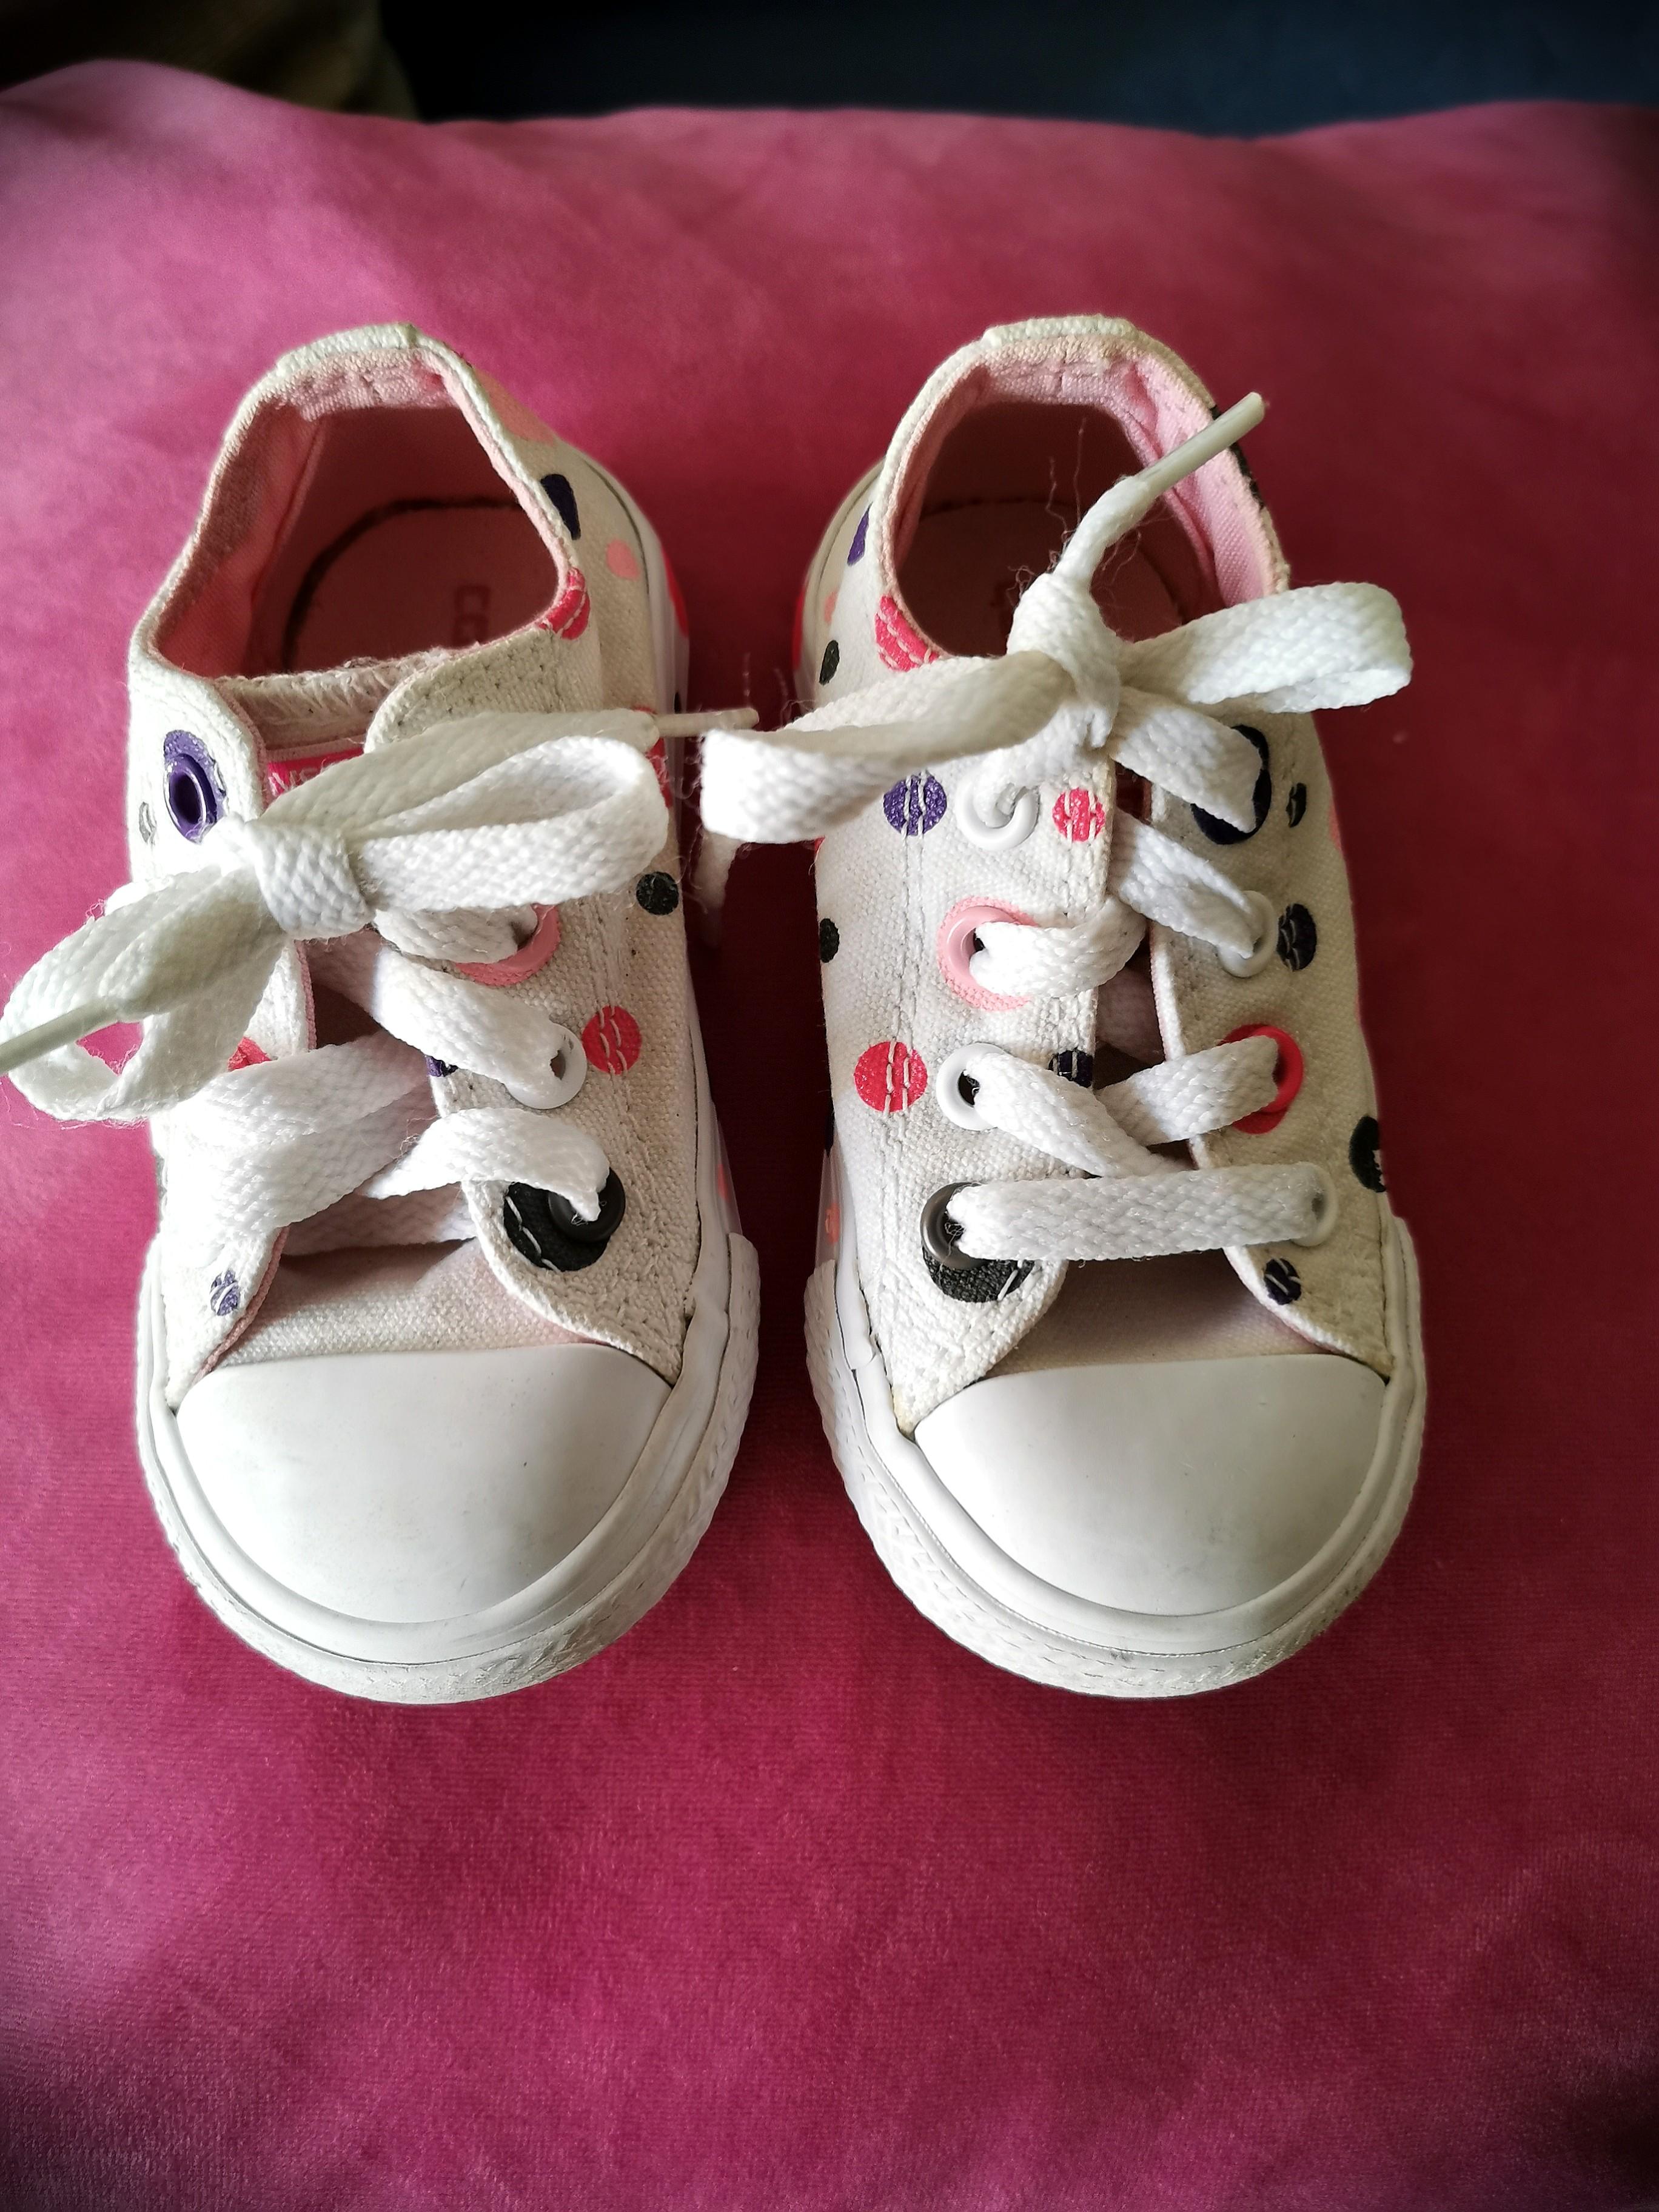 converse baby size 5